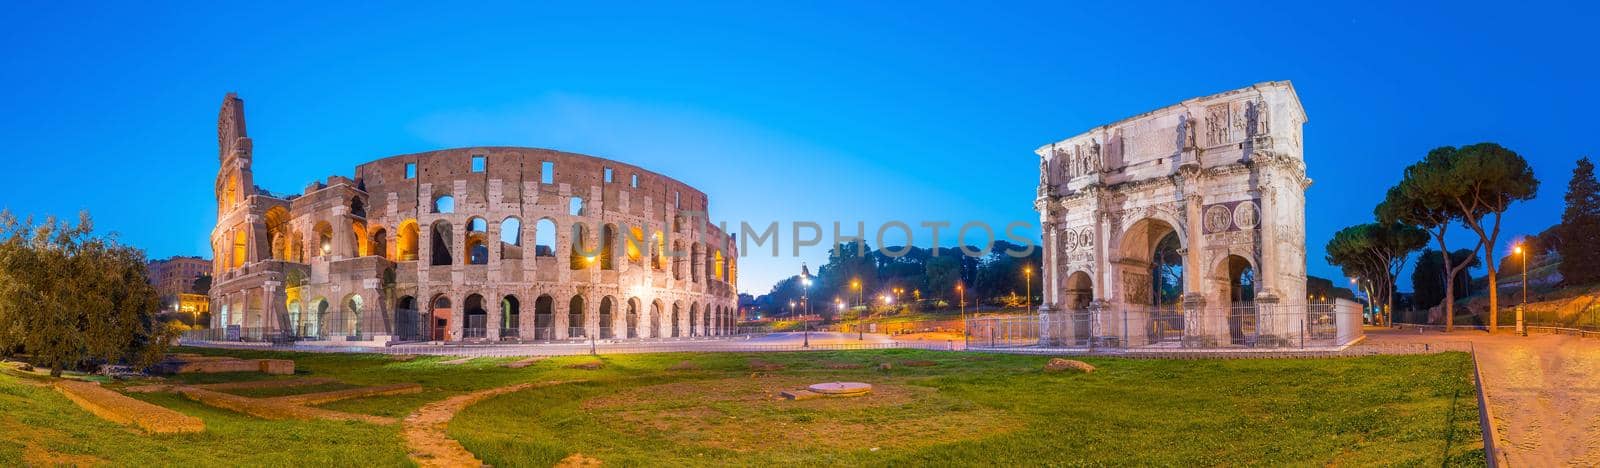 View of Colosseum in Rome at twilight, Italy, Europe.